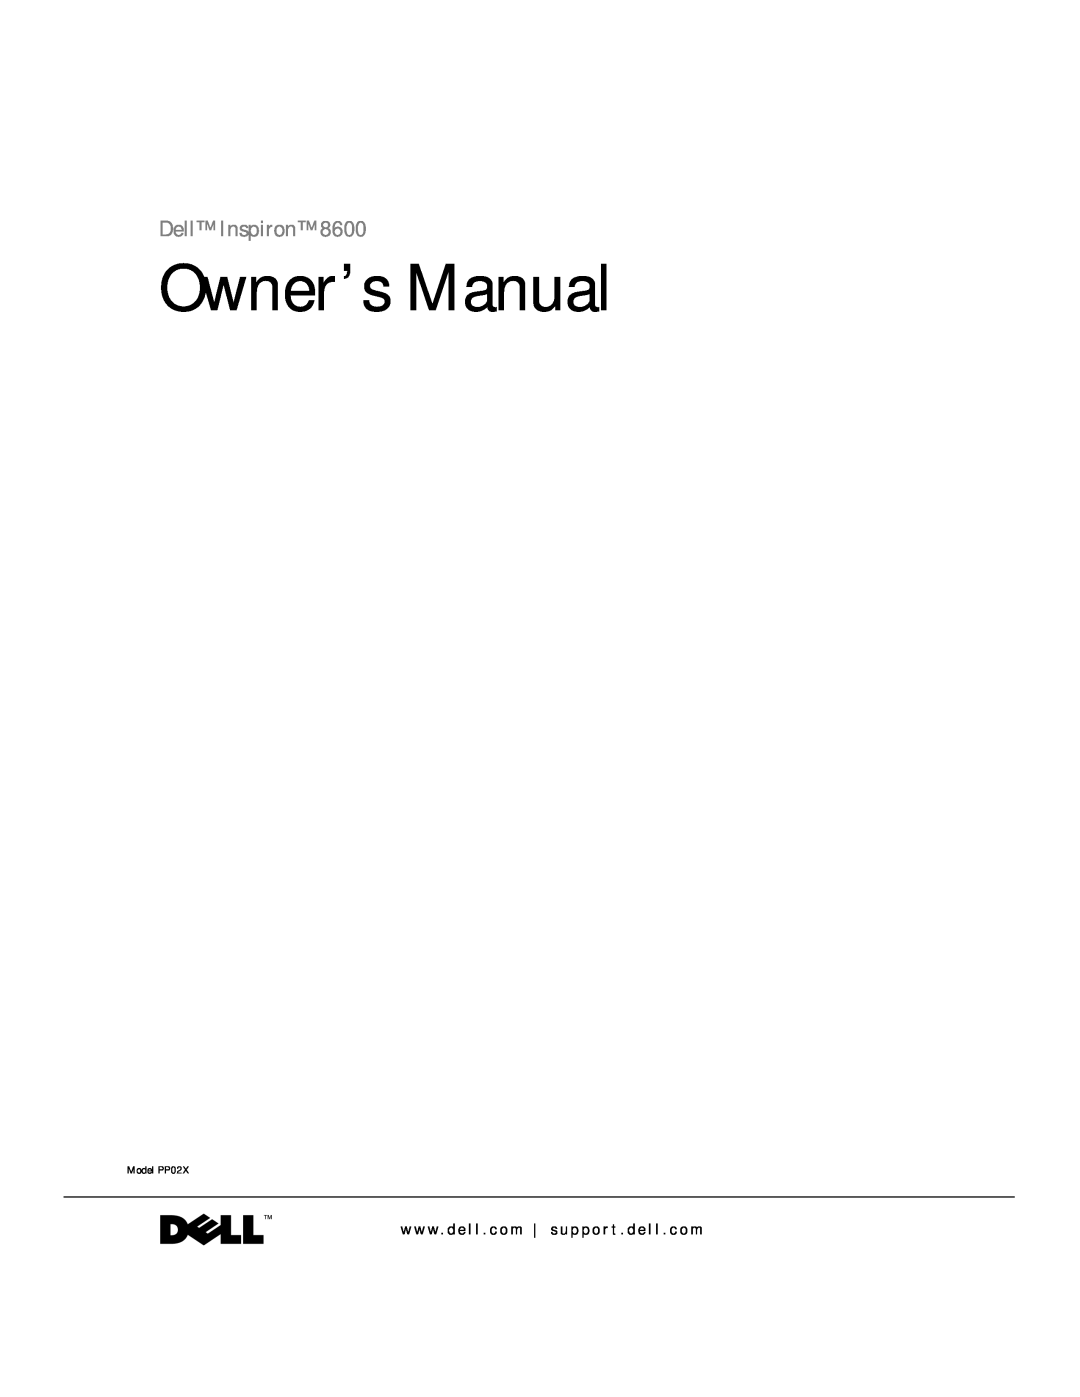 Dell 8600 manual Owner’s Manual, Dell Inspiron, Model PP02X 